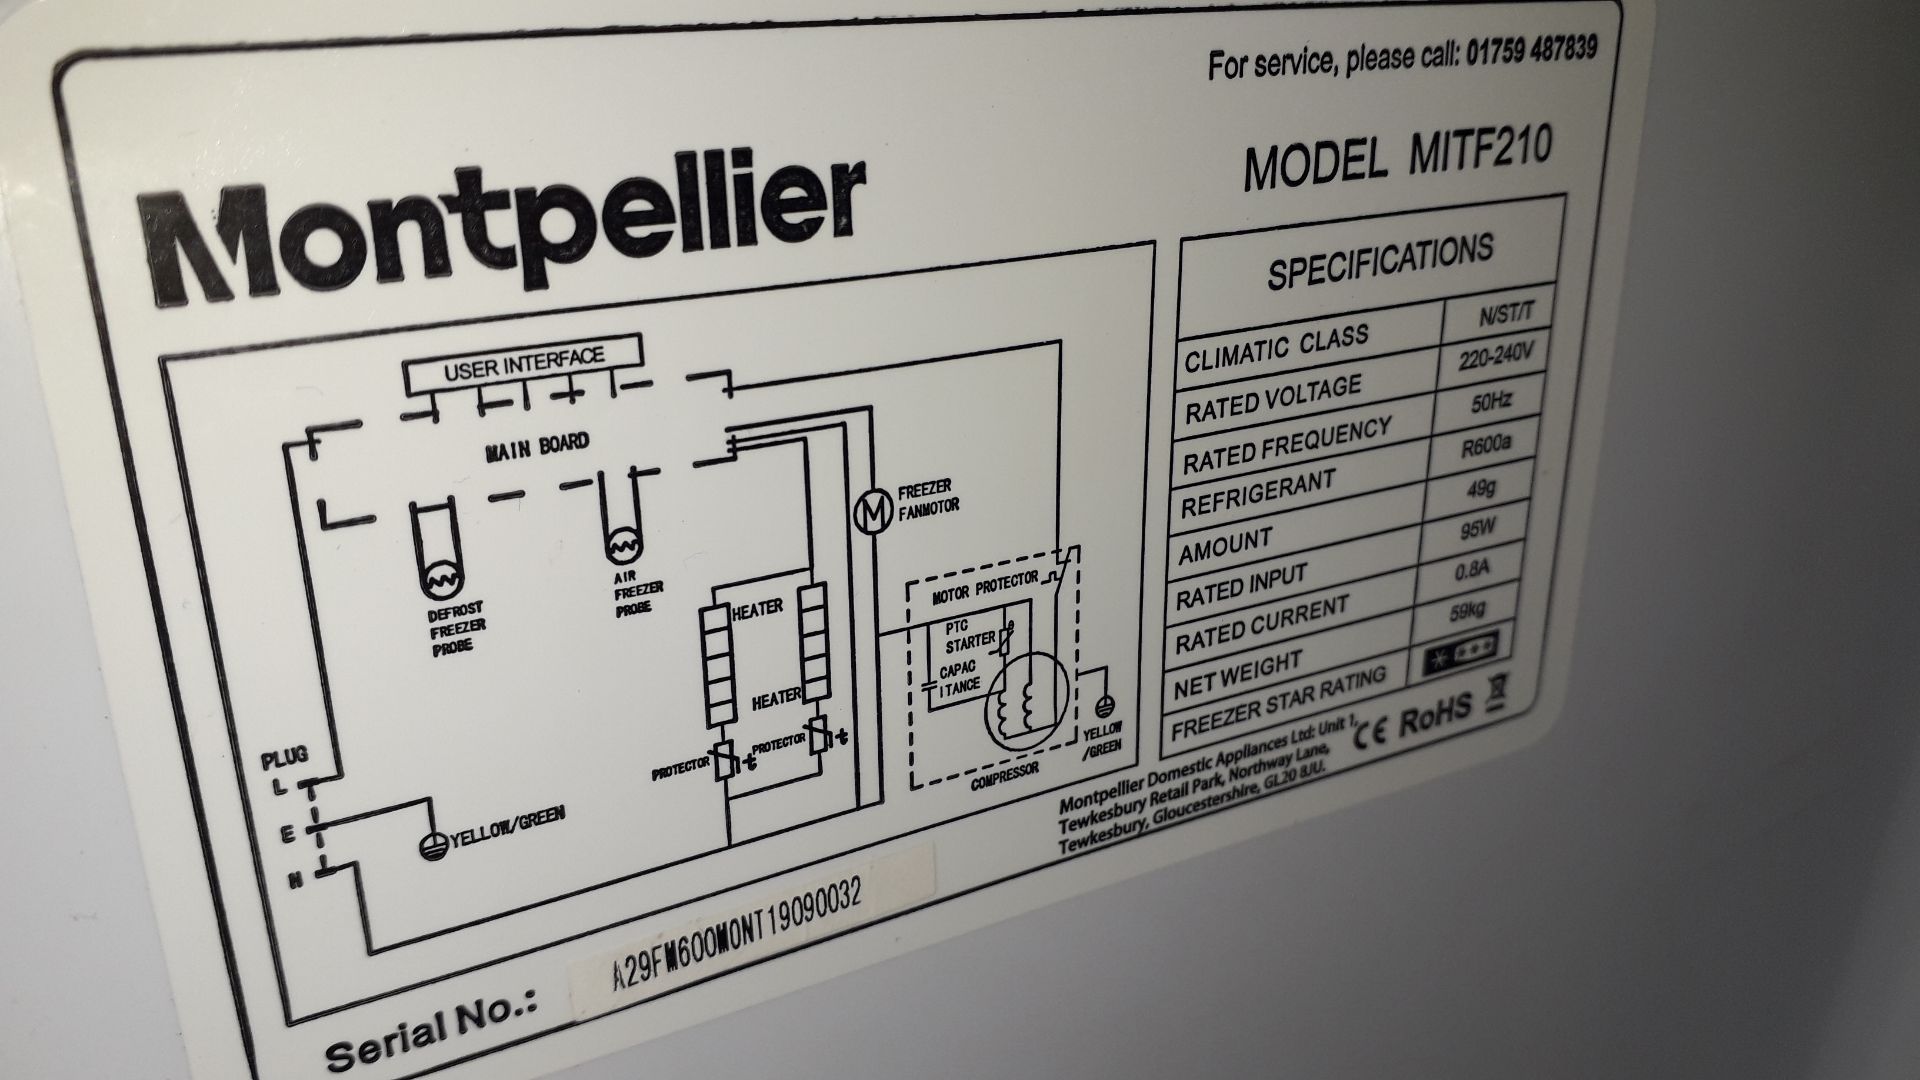 Montpellier MITF210 Tall In-column 200ltr No Frost Freezer, serial number A29FM600MONT 19090032 - Image 3 of 3